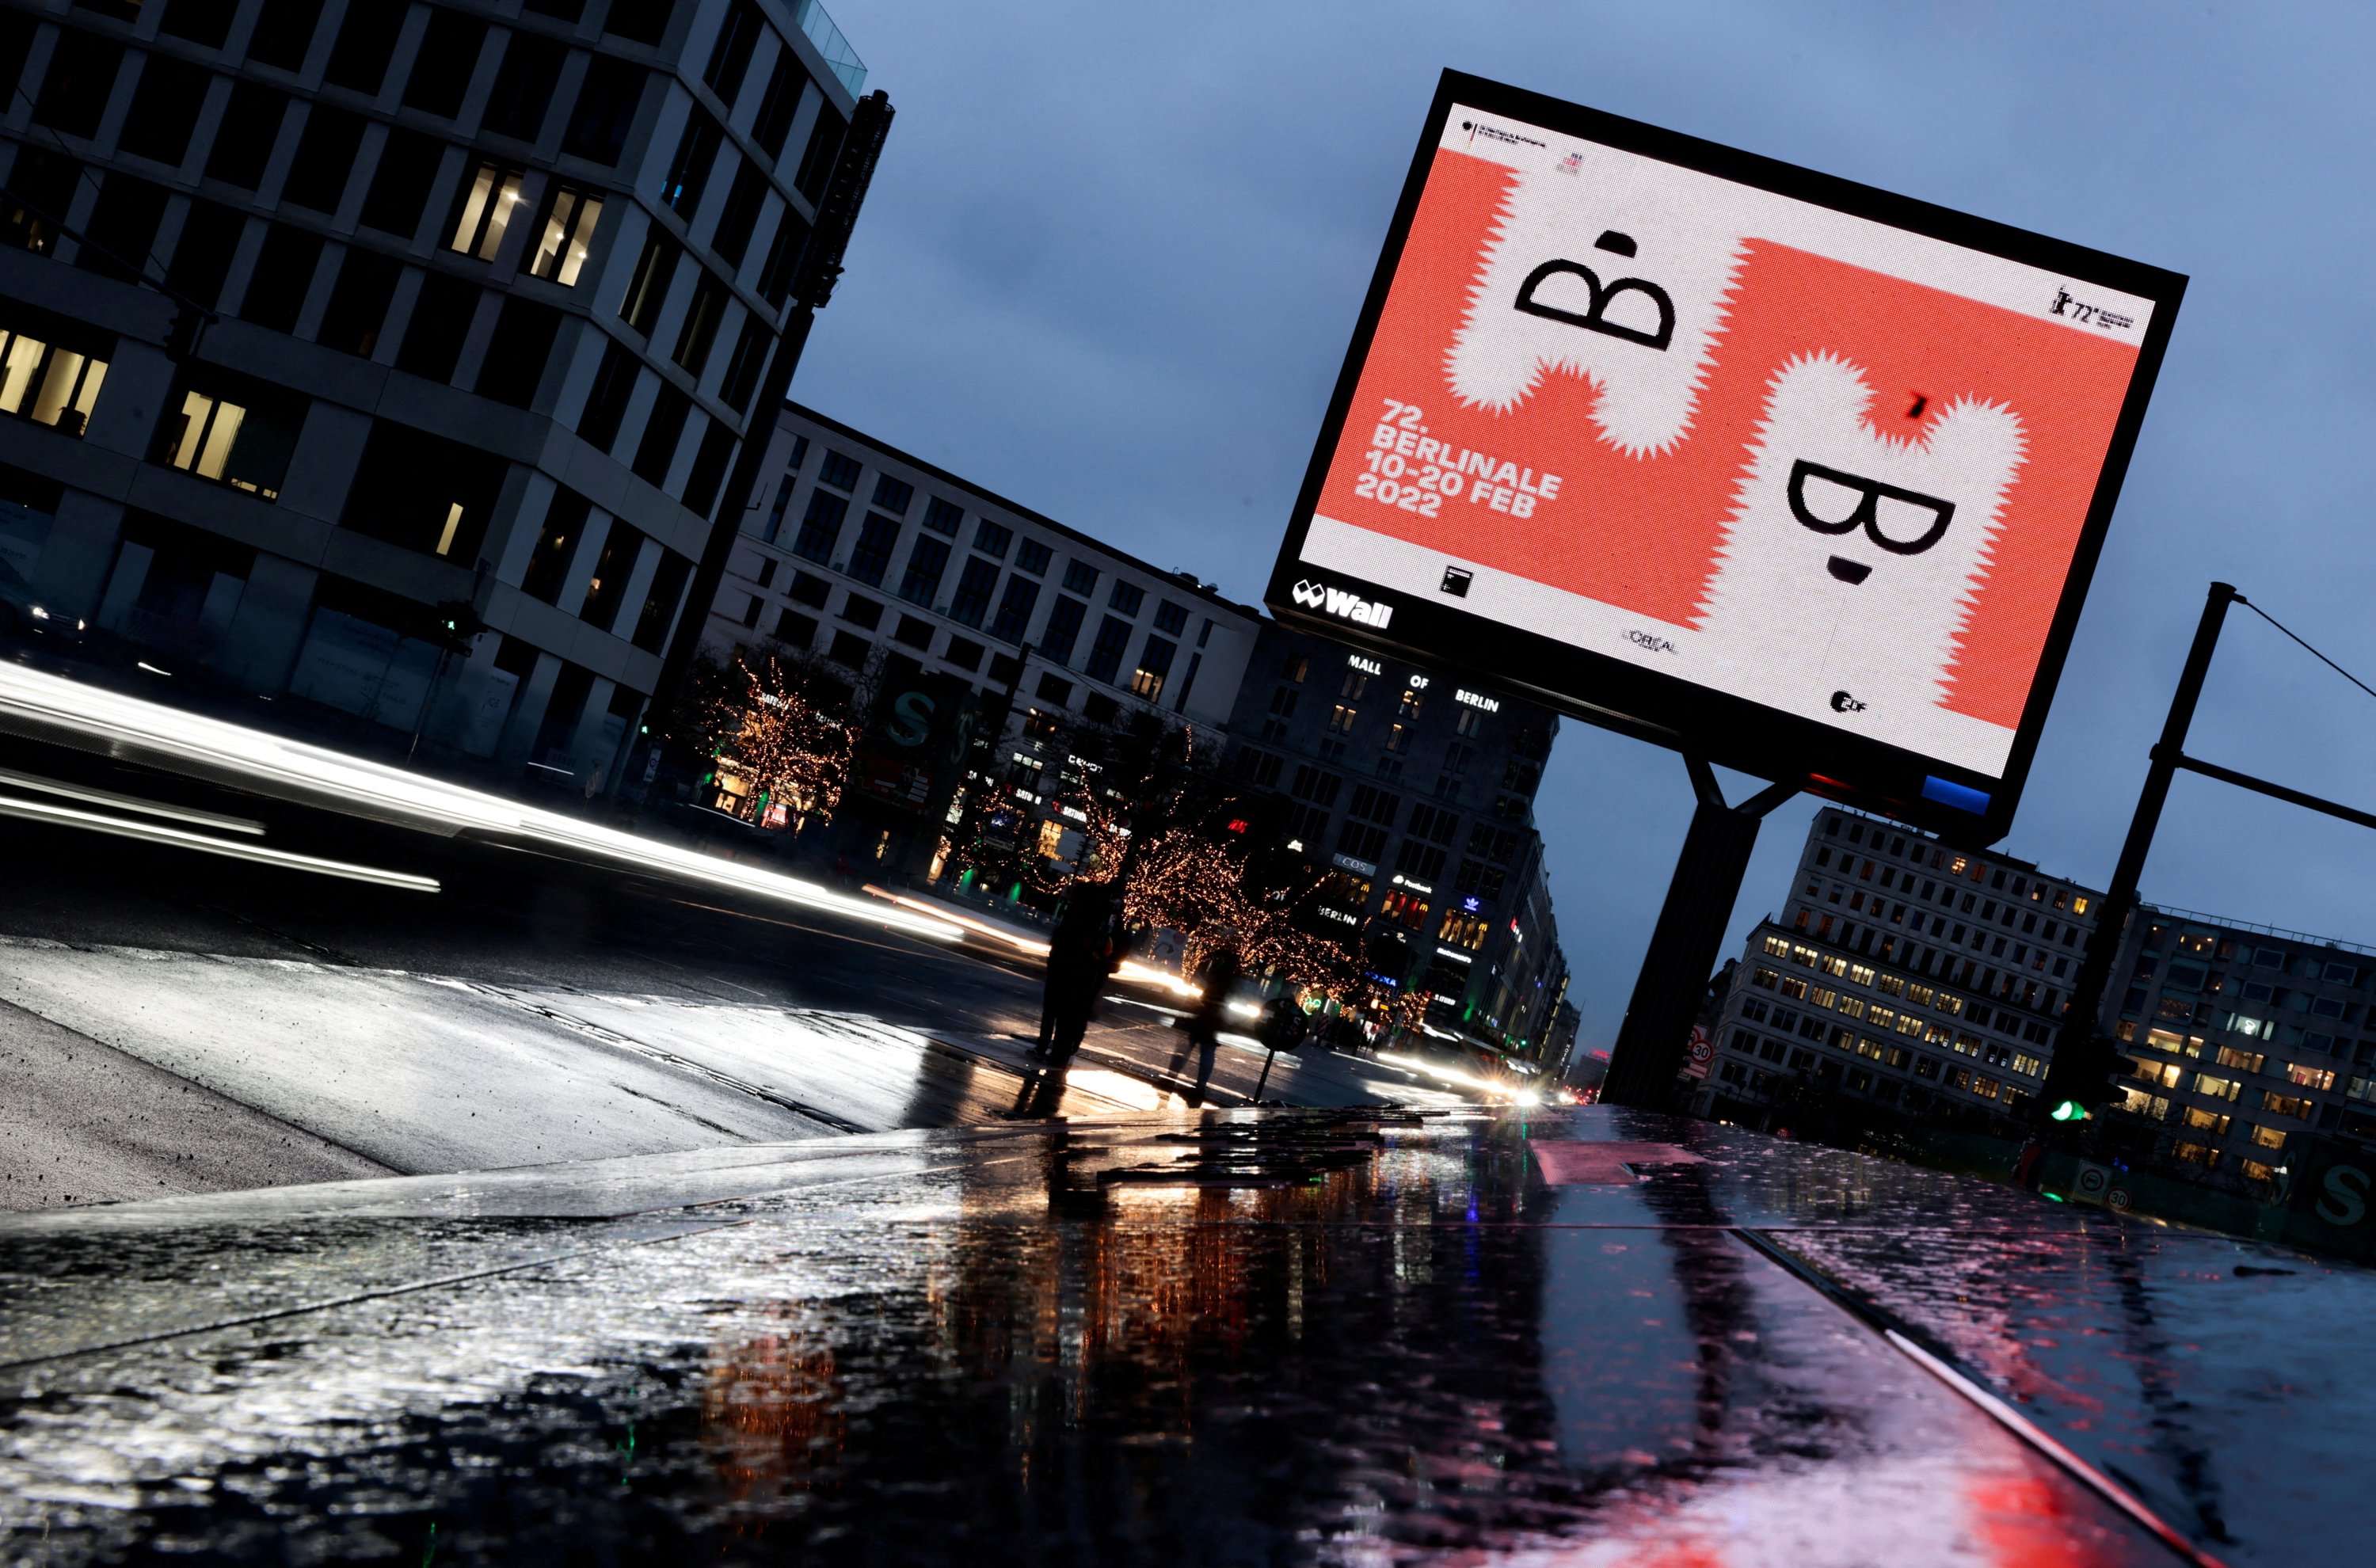 An advertising board for the upcoming Berlinale Film Festival is pictured in Berlin, Germany, Feb. 8, 2022. (REUTERS Photo)